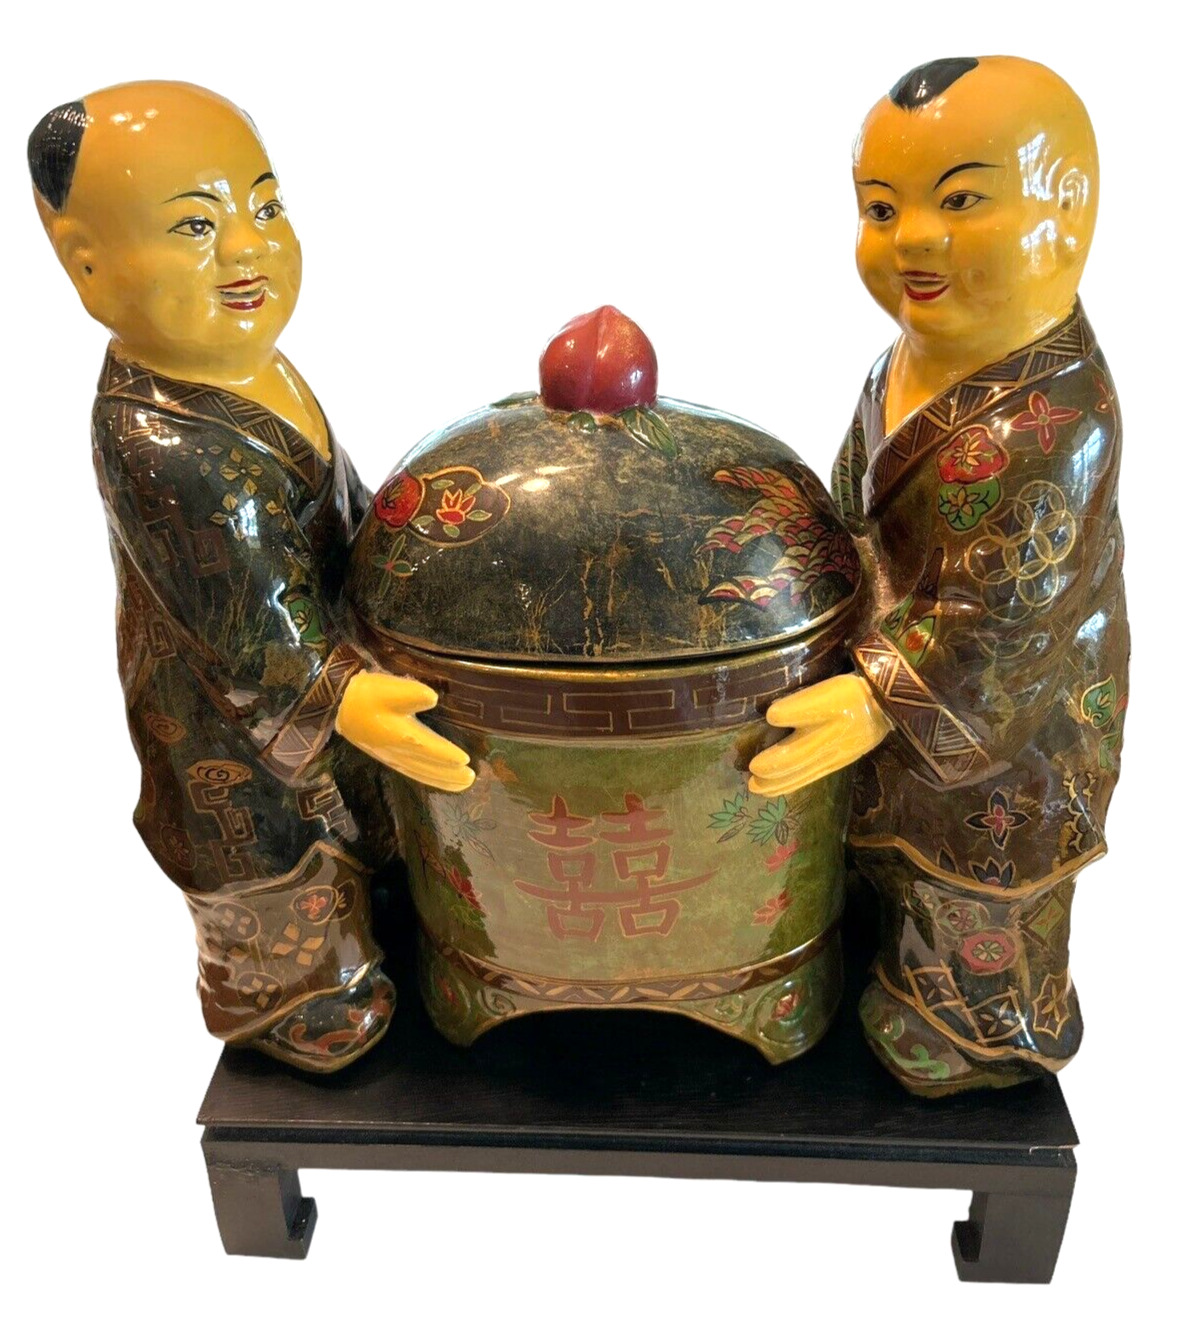 Decorative Asian Chinese Two Men Figure Statue Holding Lidded Jar Wooden Stand